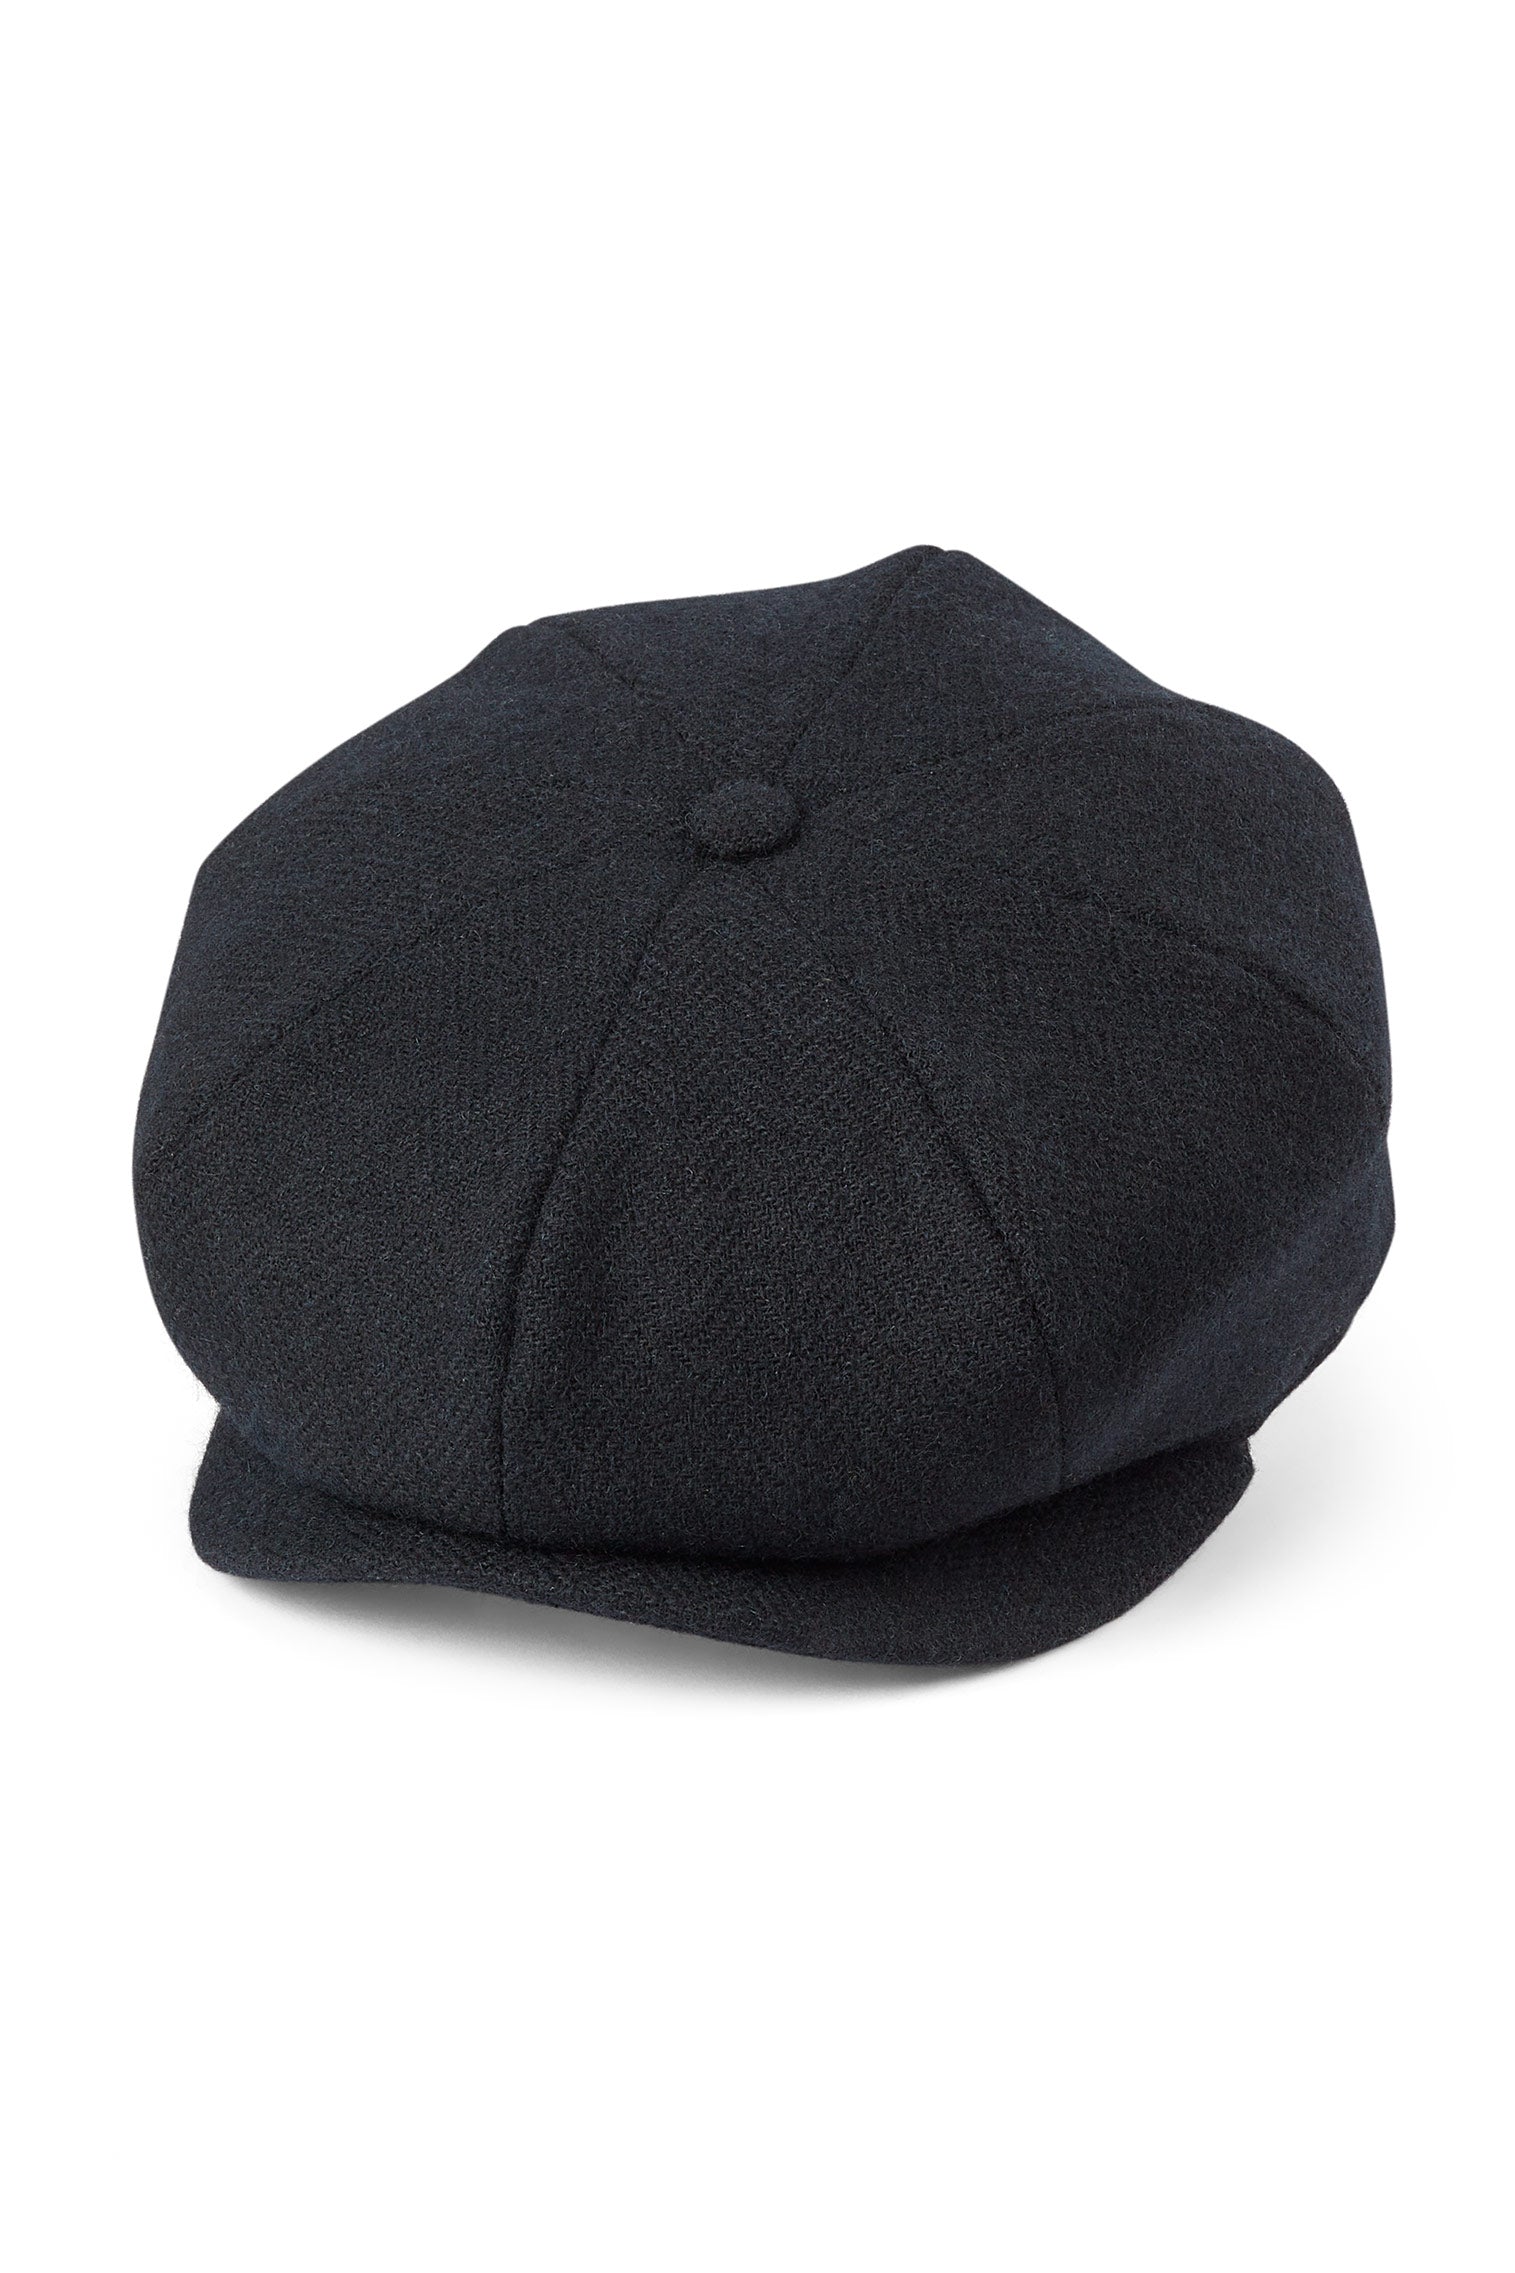 Tremelo Black Bakerboy Cap - Hats for Oval Face Shapes - Lock & Co. Hatters London UK